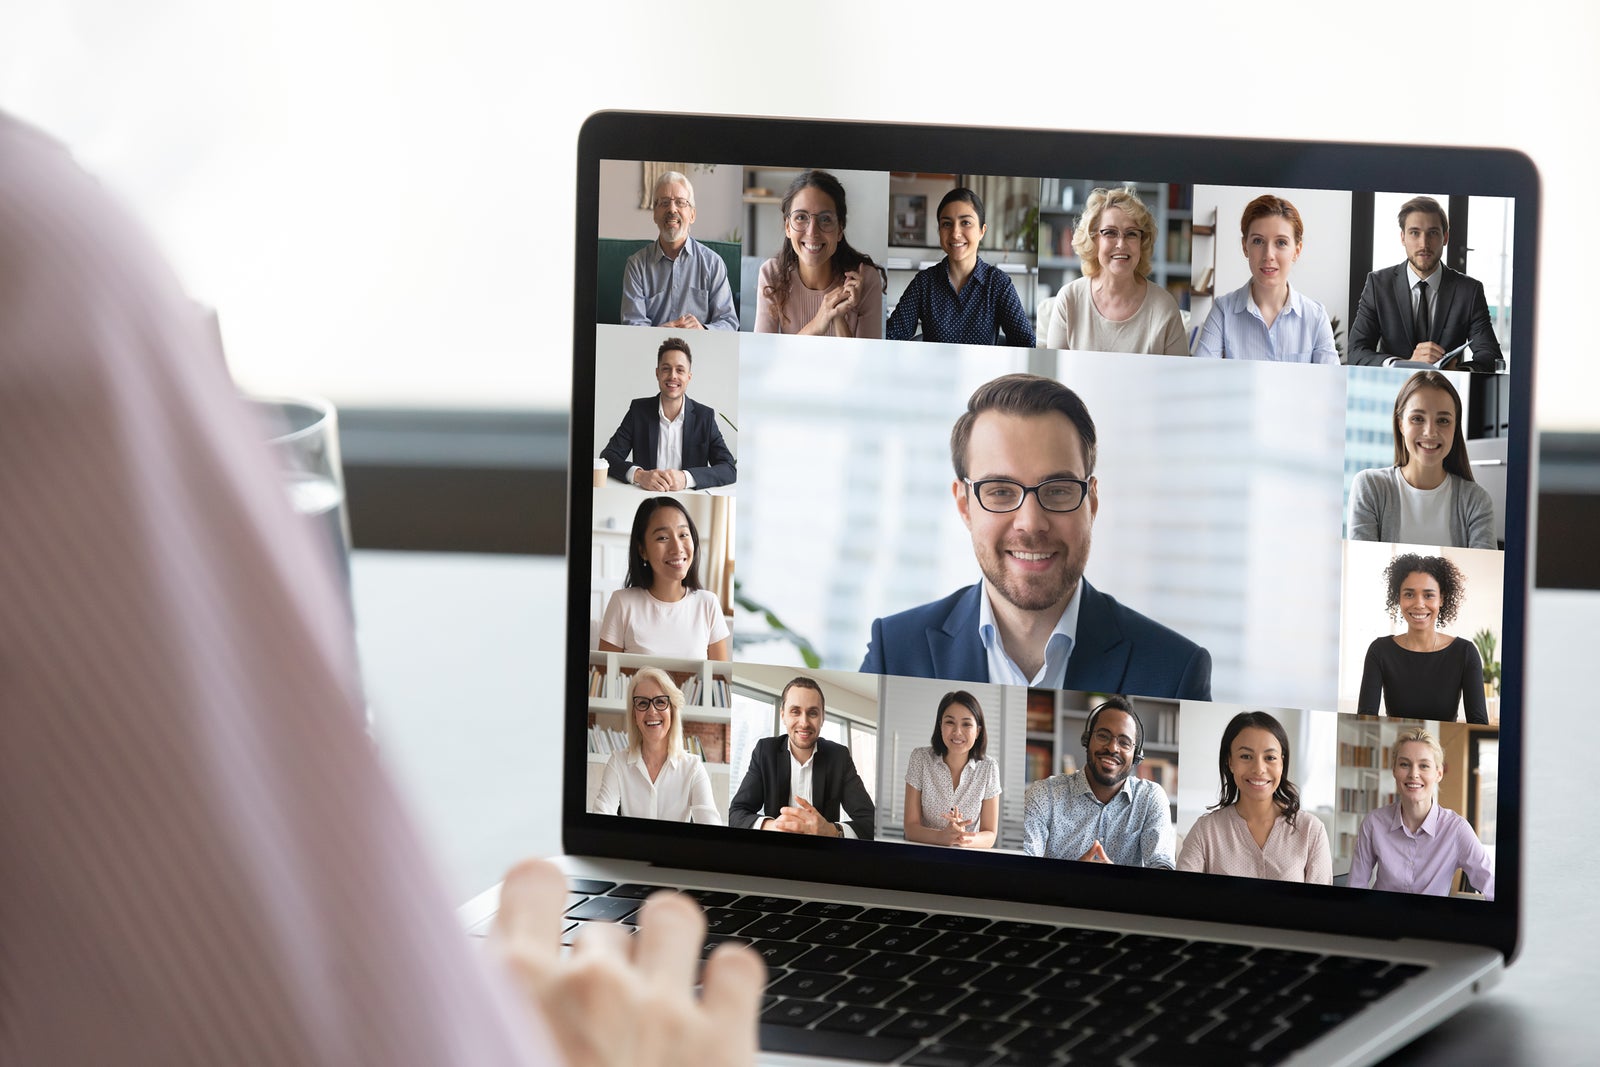 5 Common Use Cases Of Web Conferencing Tools